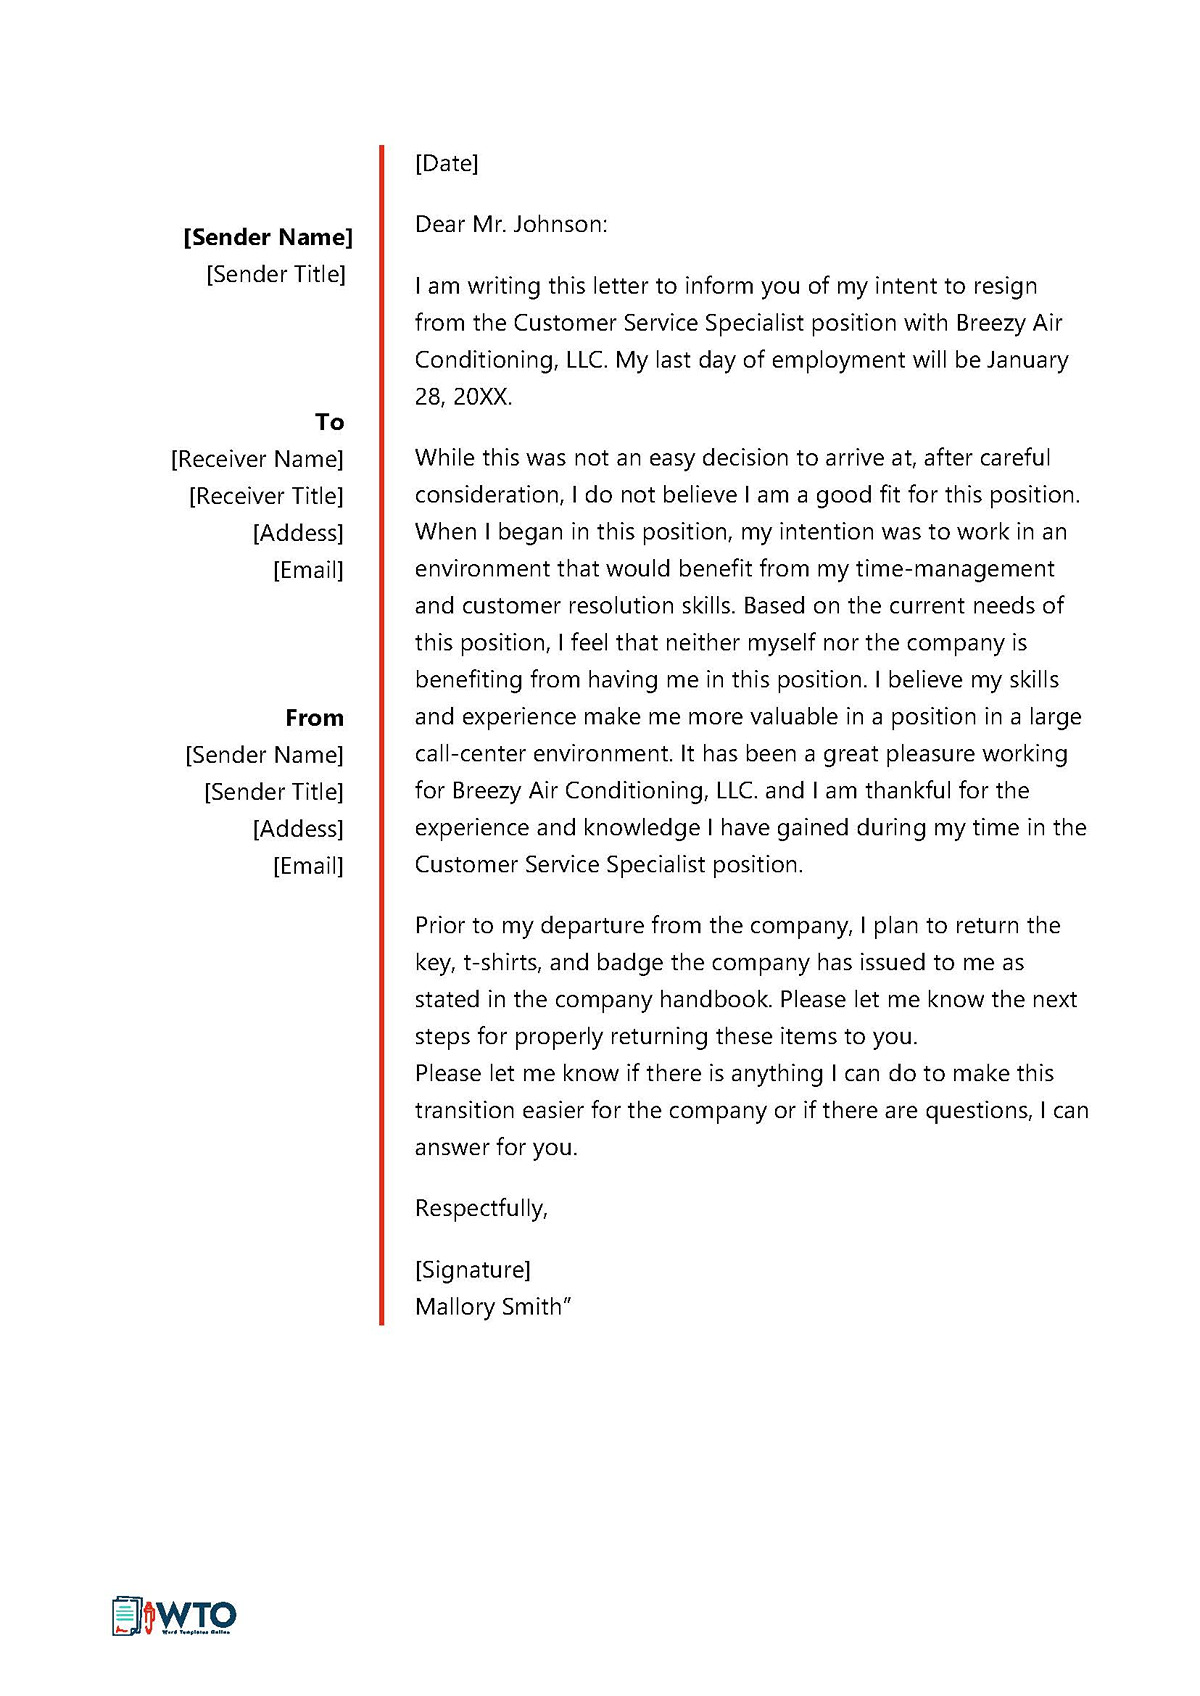 Free Resignation Letter Template - Editable Format (Job Not a Good Fit)